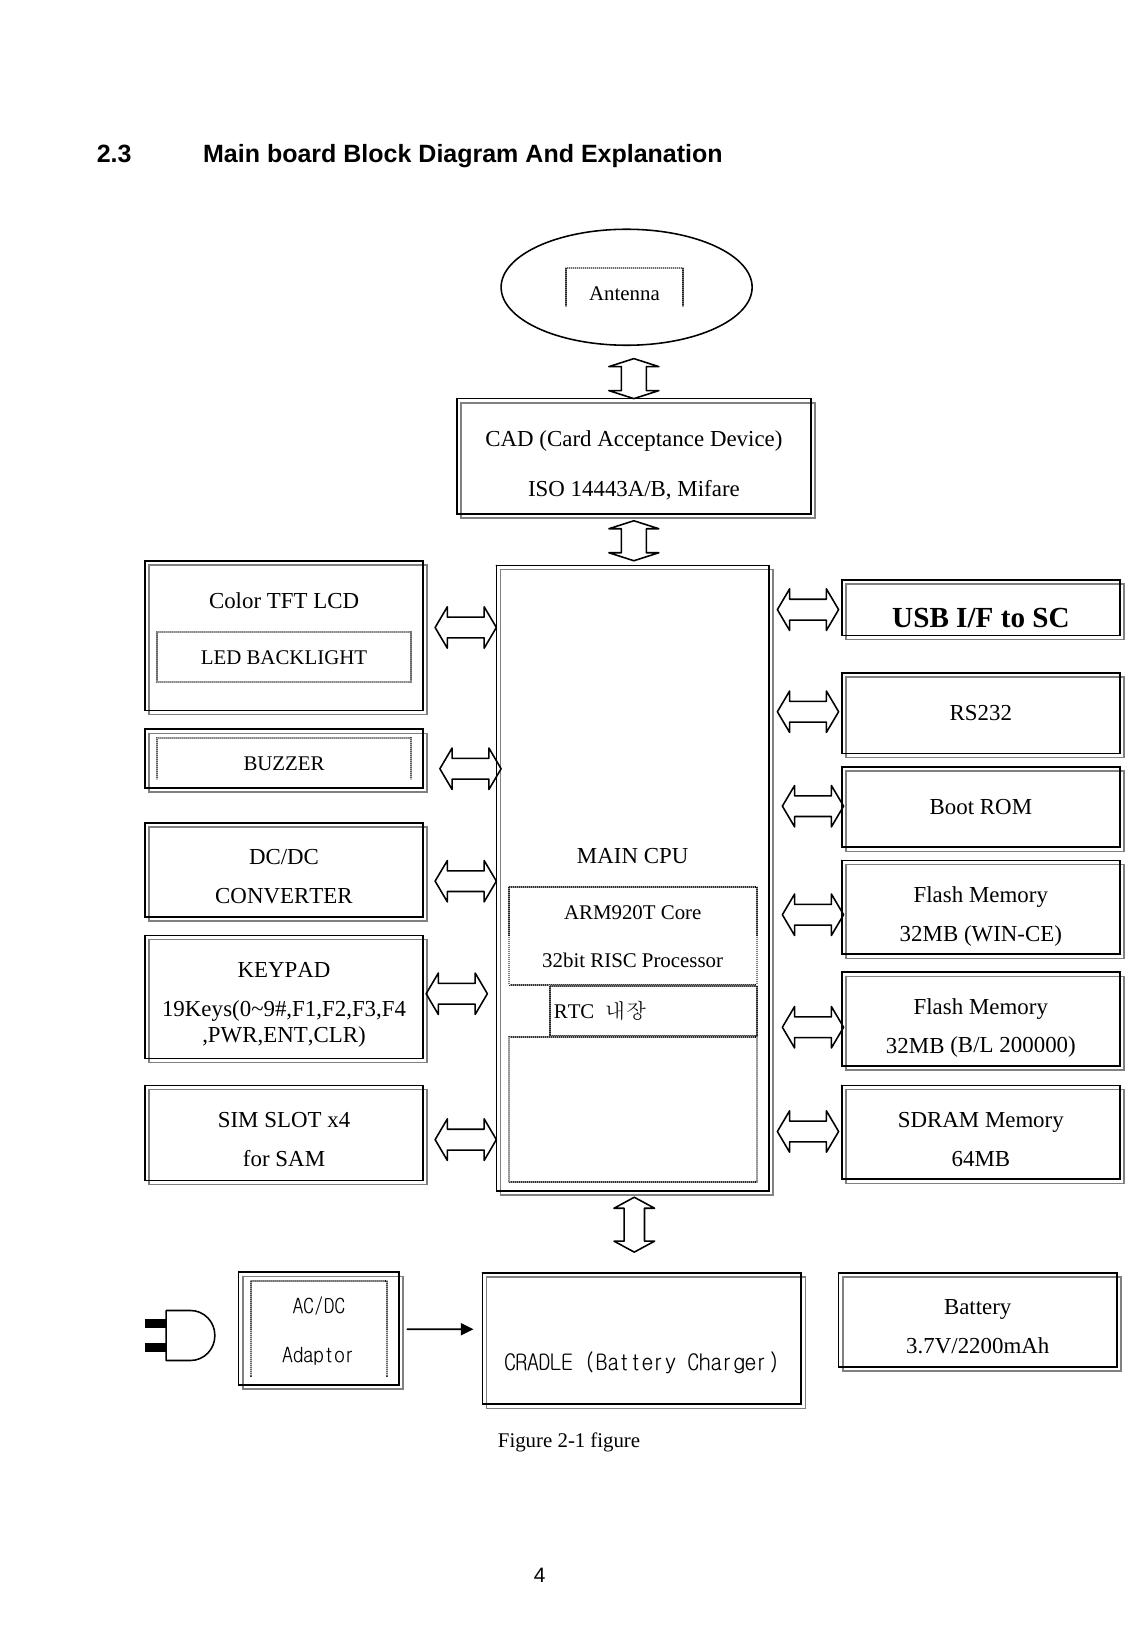   CRADLE (Battery Charger) 2.3  Main board Block Diagram And Explanation                                  Figure 2-1 figure   4    CAD (Card Acceptance Device) ISO 14443A/B, Mifare   Antenna      MAIN CPU ARM920T Core 32bit RISC Processor RTC  내장  RS232 Flash Memory 32MB (B/L 200000)SIM SLOT x4 for SAM BUZZER DC/DC CONVERTER KEYPAD 19Keys(0~9#,F1,F2,F3,F4,PWR,ENT,CLR) AC/DC  Adaptor Color TFT LCD LED BACKLIGHT USB I/F to SCFlash Memory 32MB (WIN-CE)Boot ROM SDRAM Memory 64MBBattery 3.7V/2200mAh